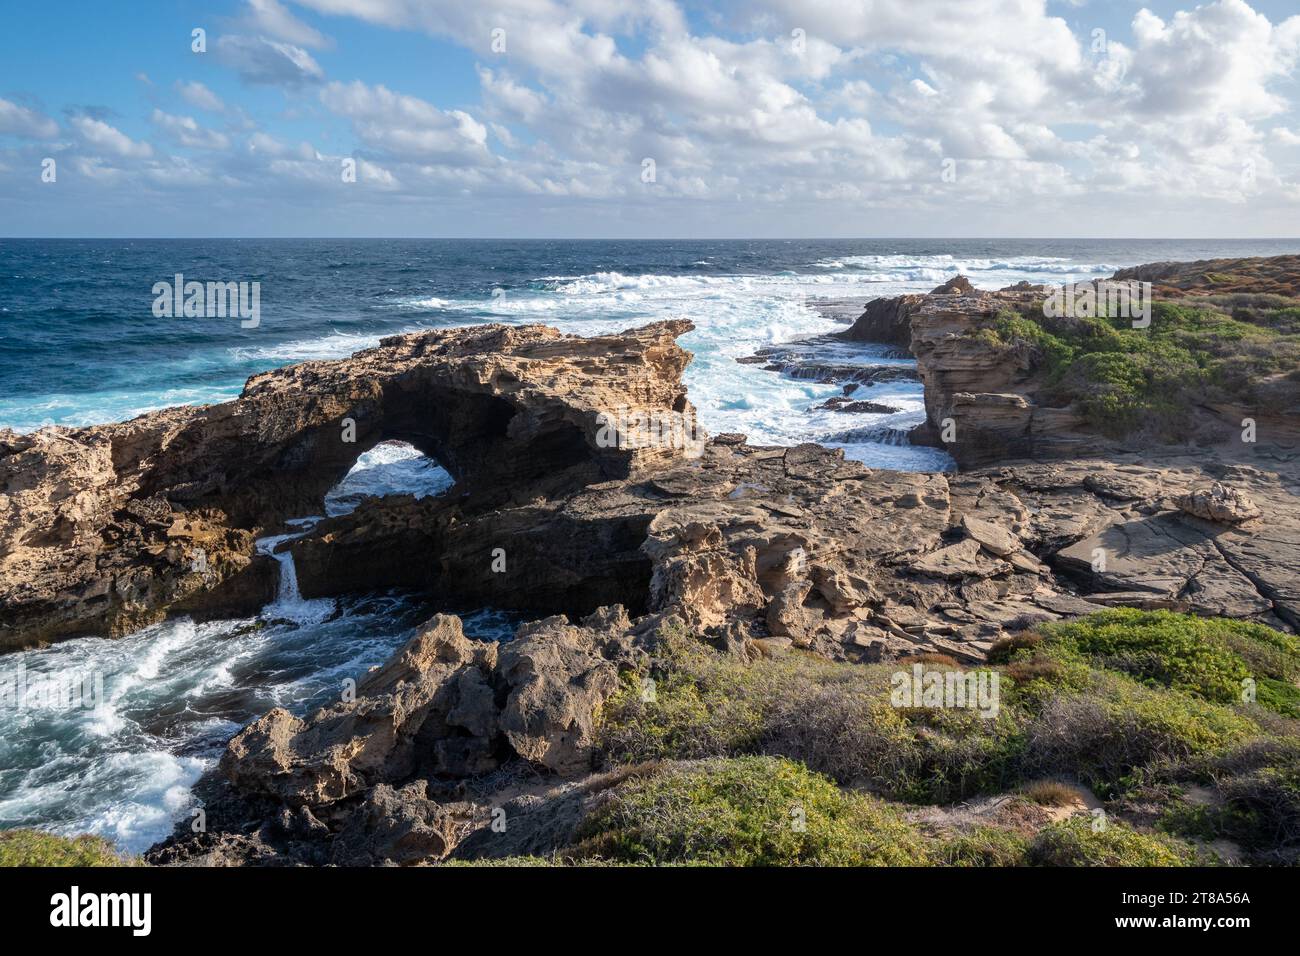 Rock formations at West End, Rottnest Island, Western Australia Stock Photo